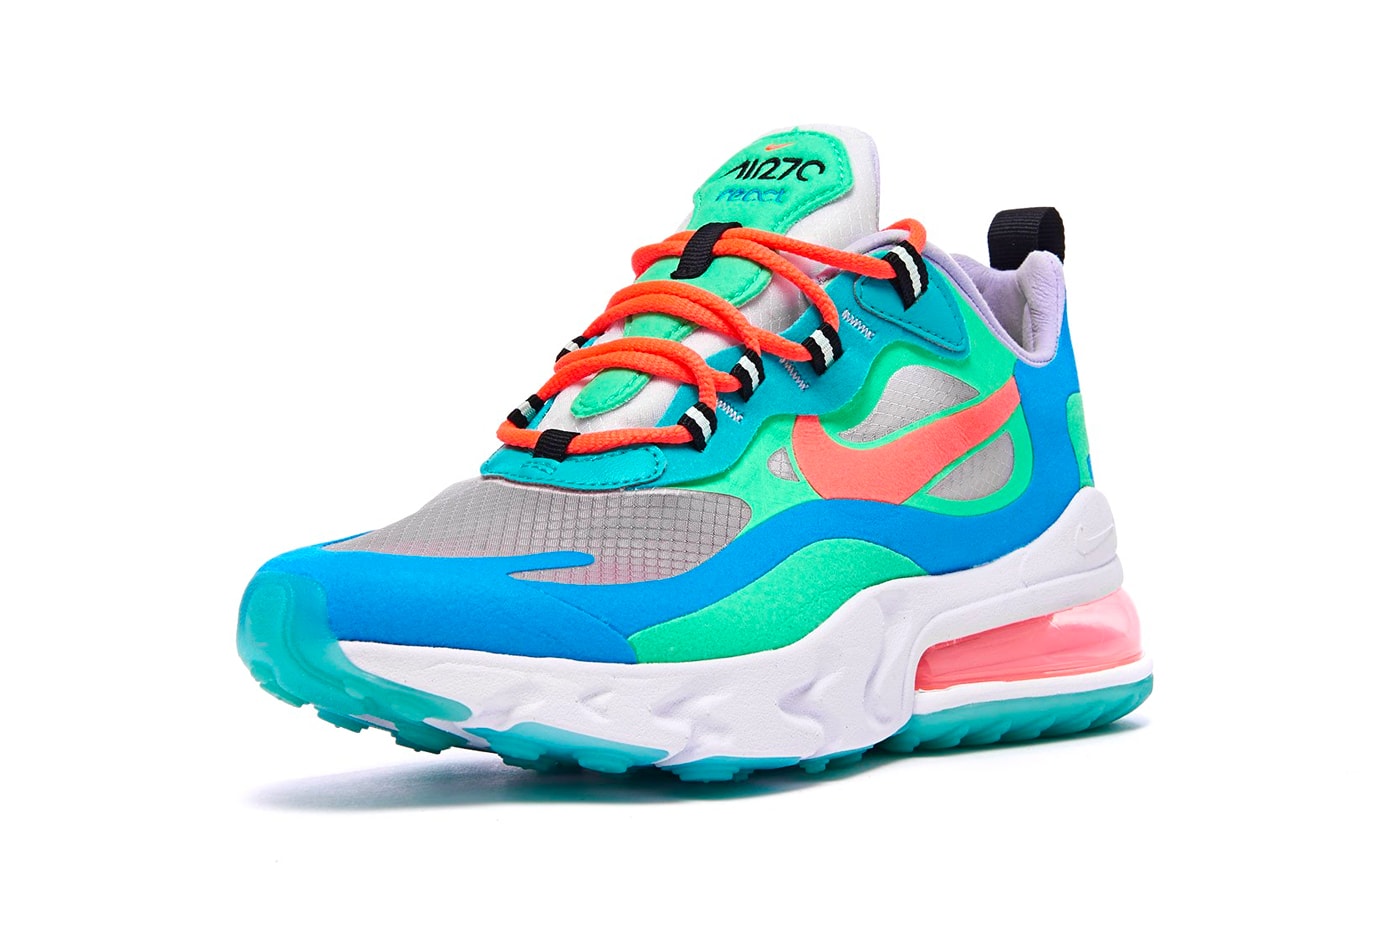 Nike's Hyper Jade Air Max 270 React & More Feature in This